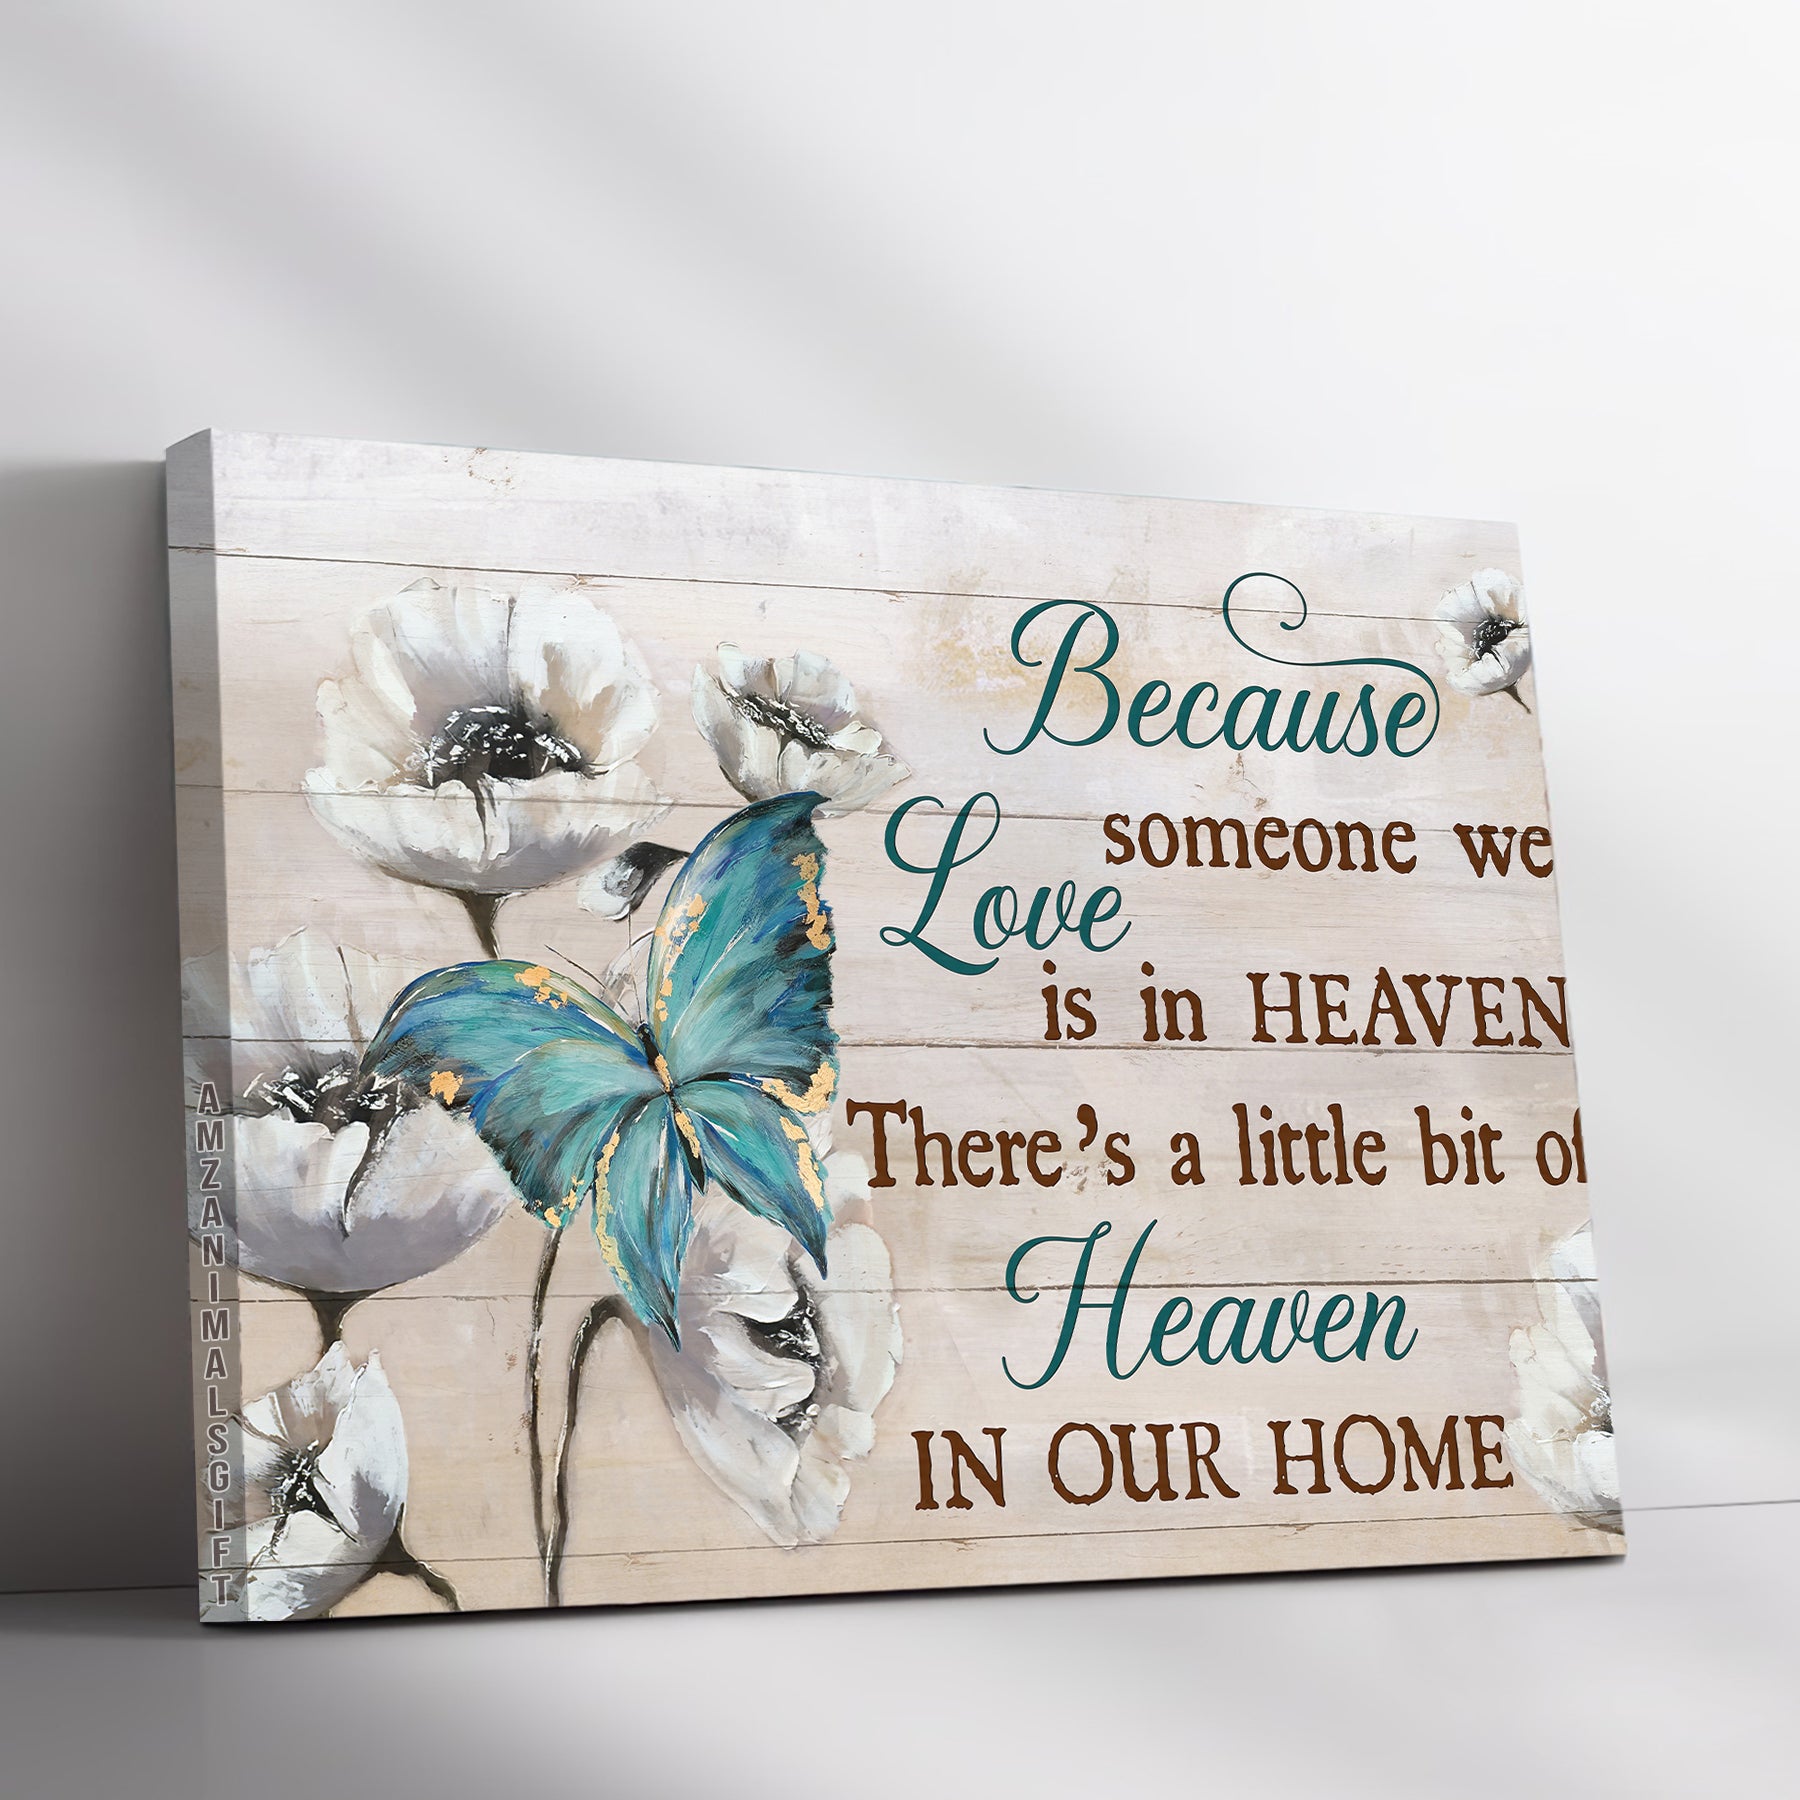 Memorial Premium Wrapped Landscape Canvas - White Poppy, Blue Butterfly, There's A Little Bit Of Heaven In Our Home - Heaven Gift For Members Family